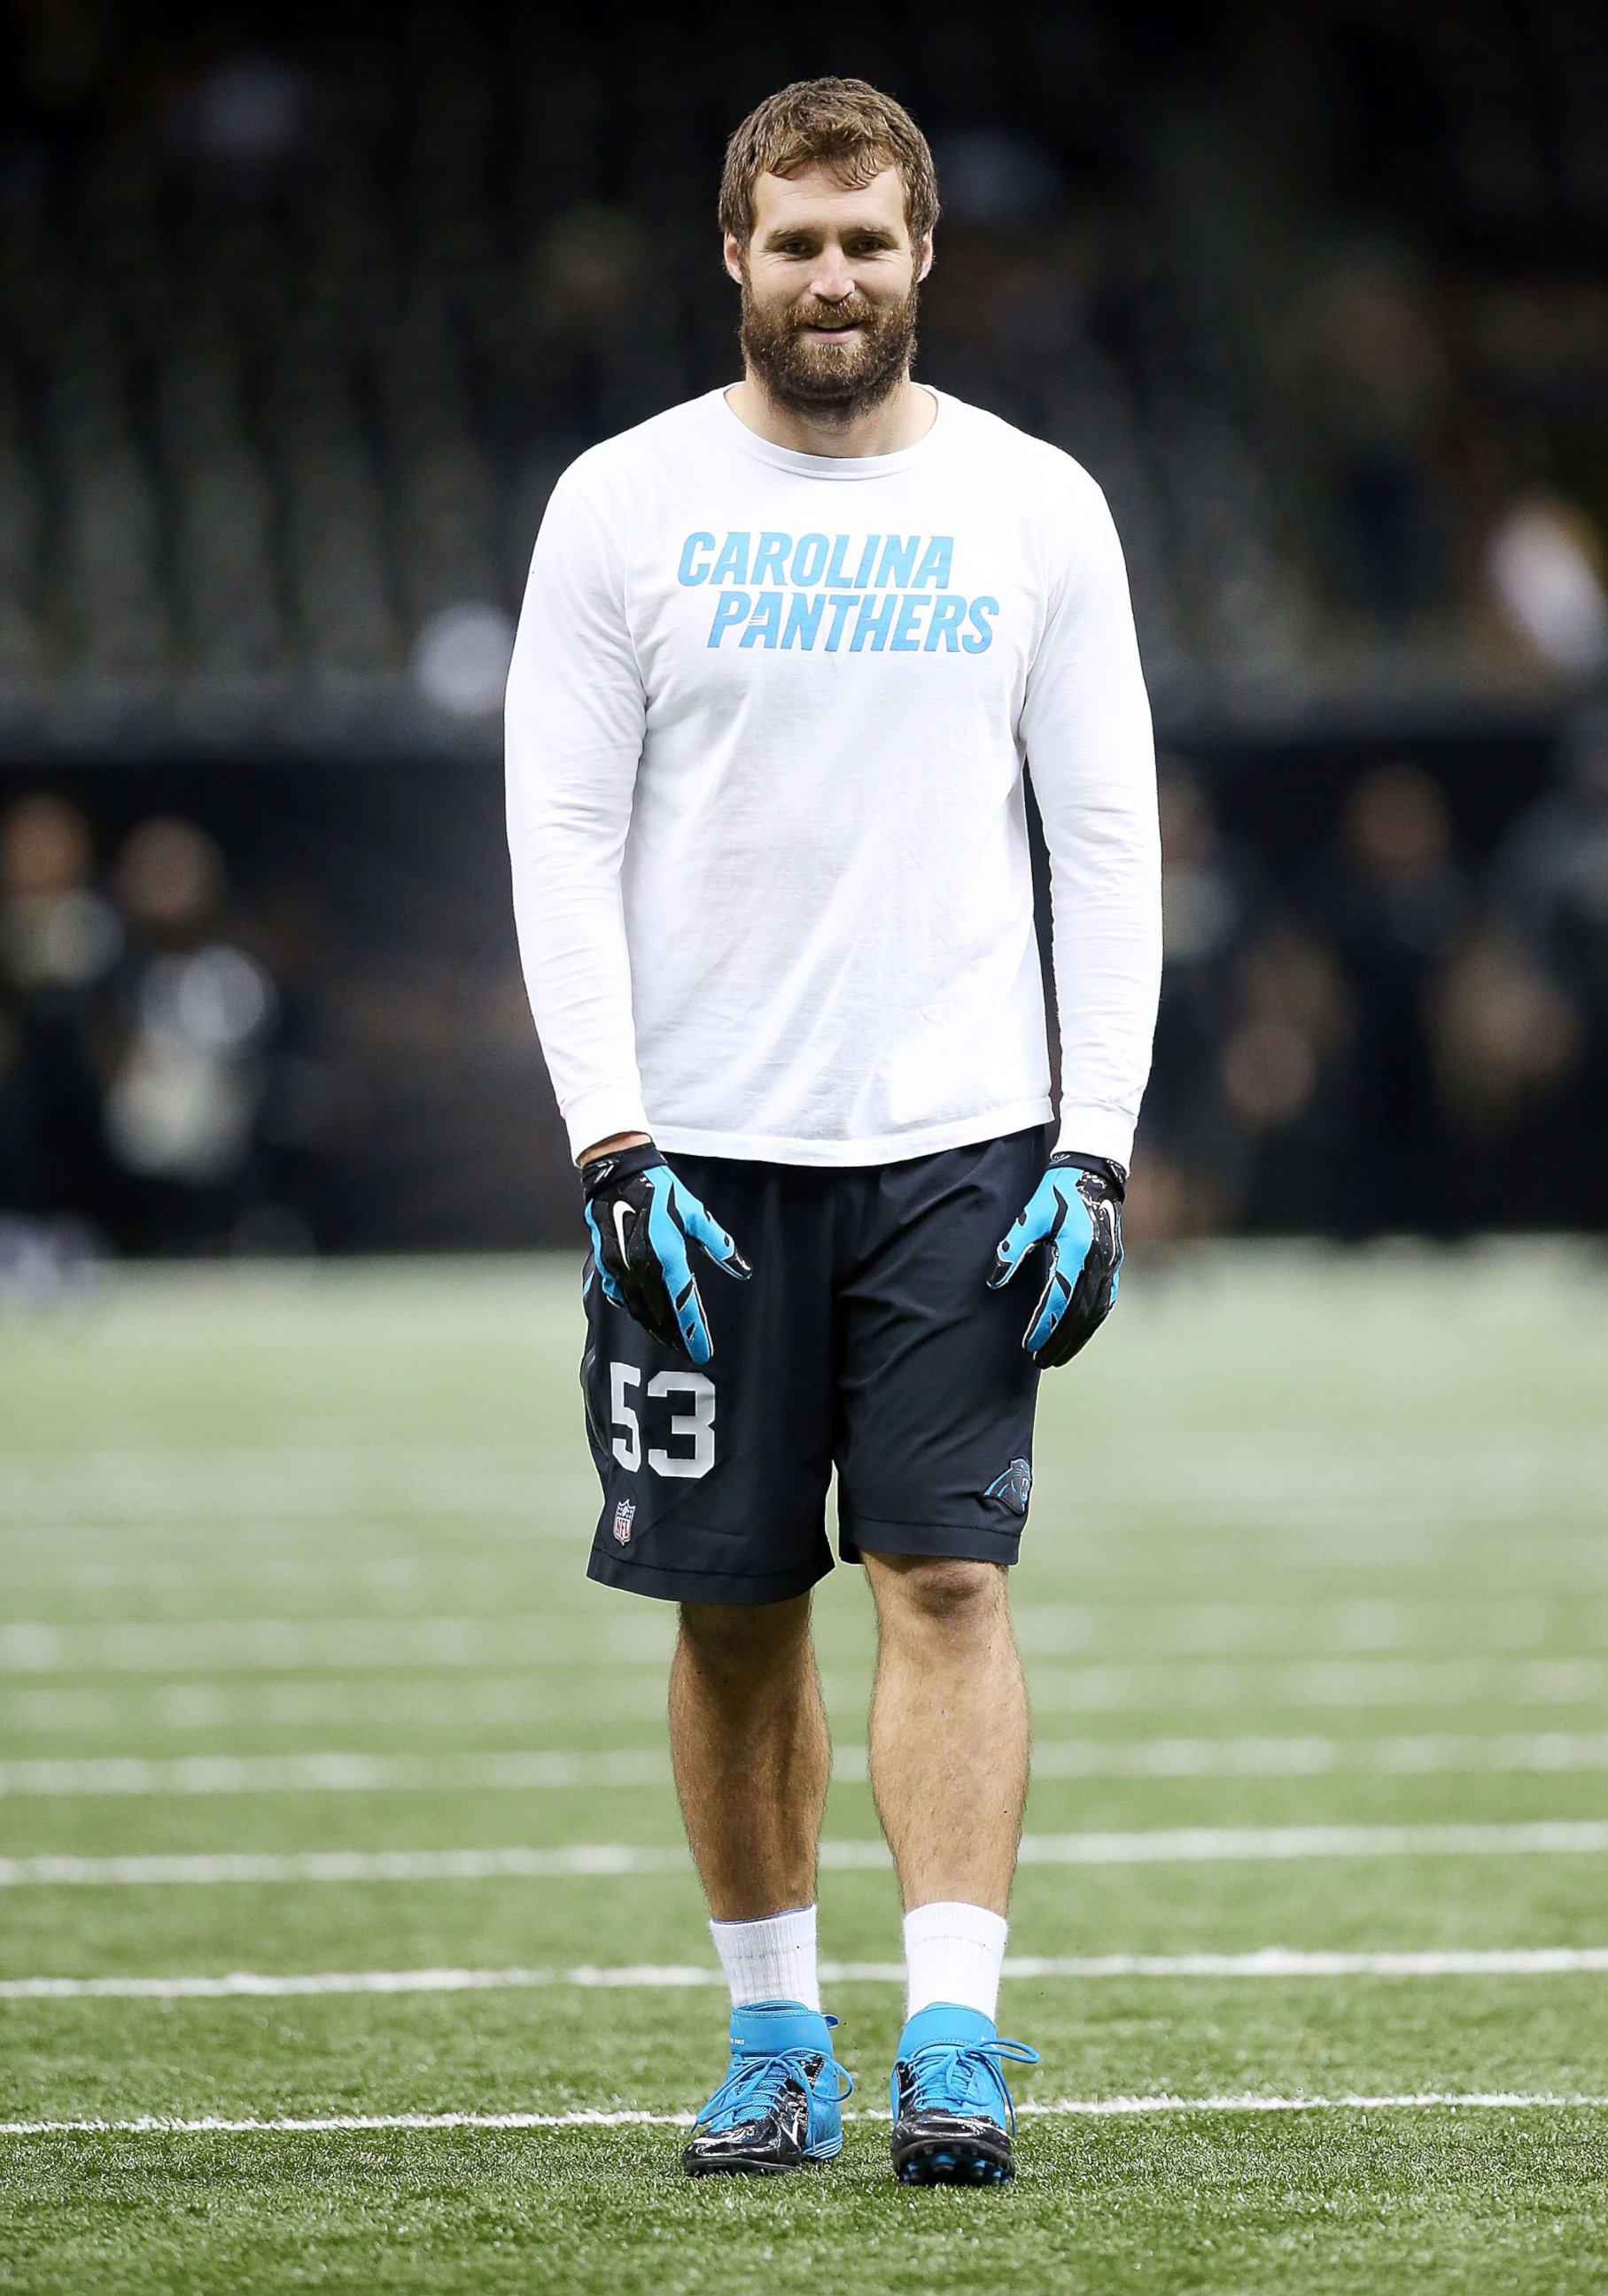 PHOTO: Ben Jacobs of the Carolina Panthers warms up before a game against the New Orleans Saints at the Mercedes-Benz Superdome on Dec. 6, 2015 in New Orleans, Louisiana